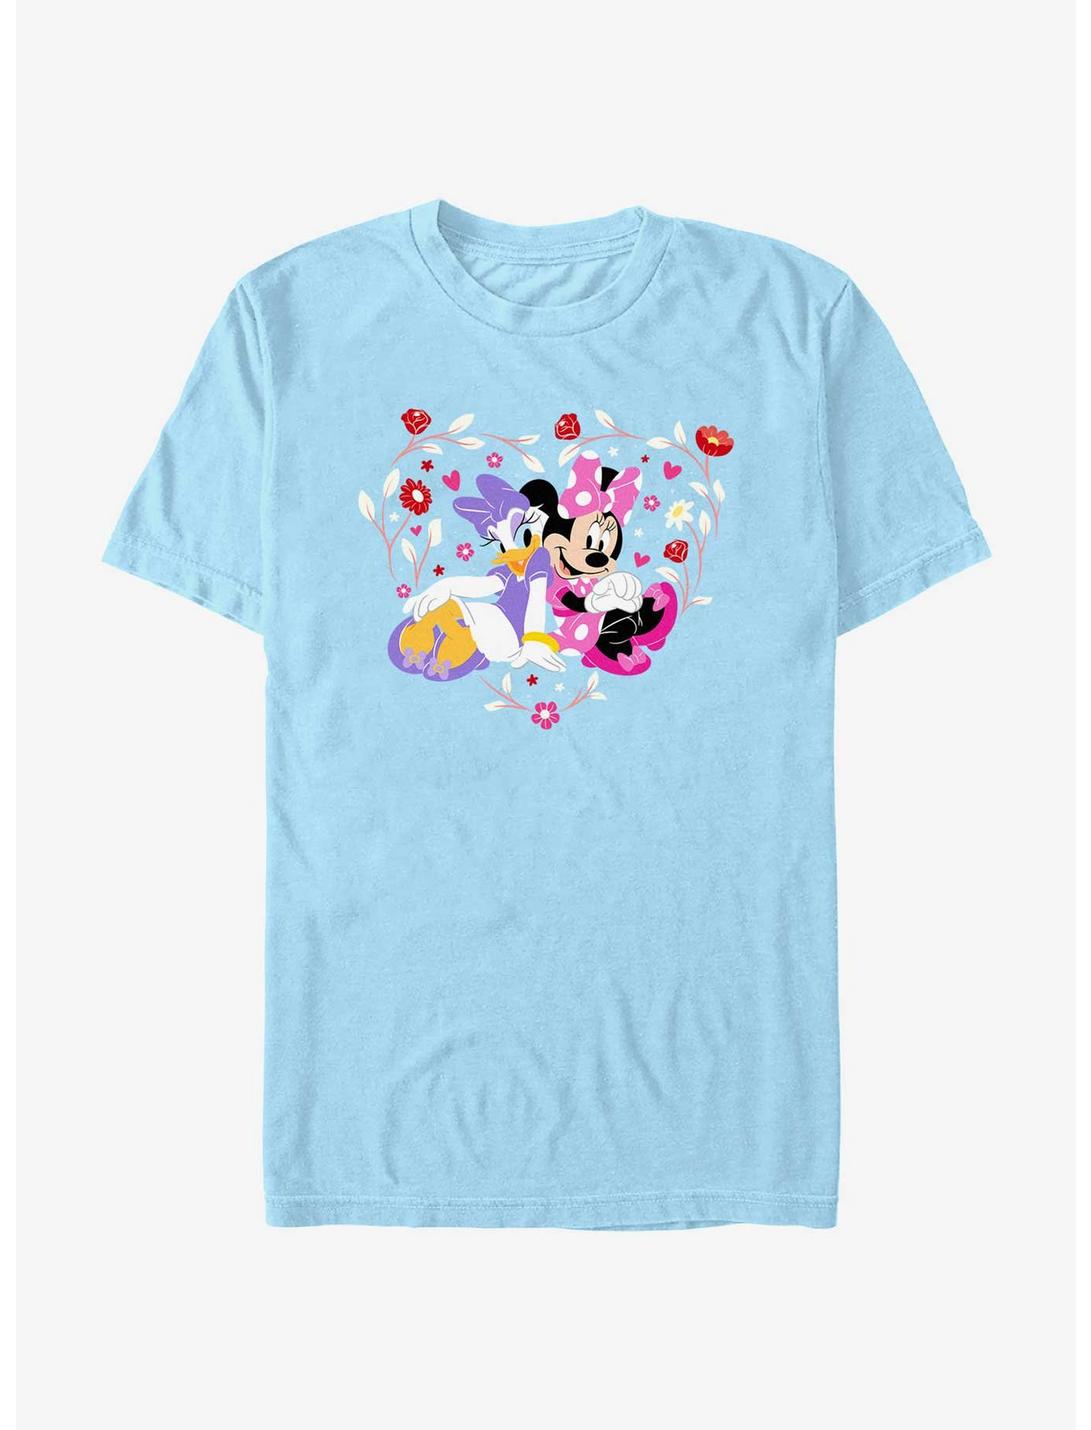 Disney Mickey Mouse Minnie And Daisy Flowers Heart T-Shirt, LT BLUE, hi-res